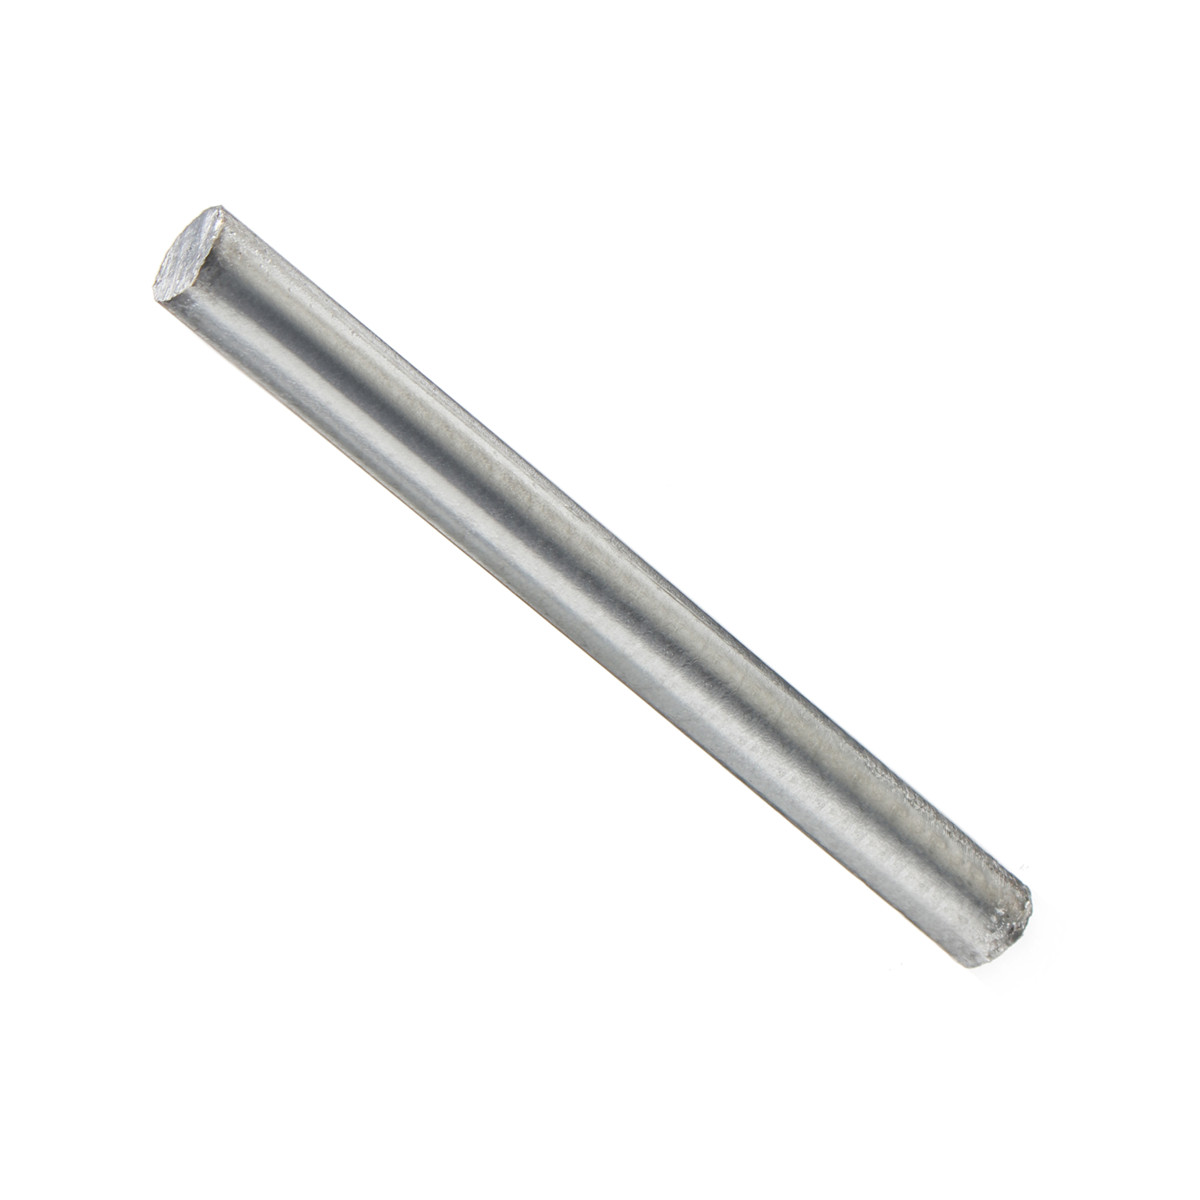 04-inch-x-4-inch-High-Purity-Zn-9995-Zinc-Metal-Rod-Anode-Electroplating-Solid-Round-Bar-1396373-3